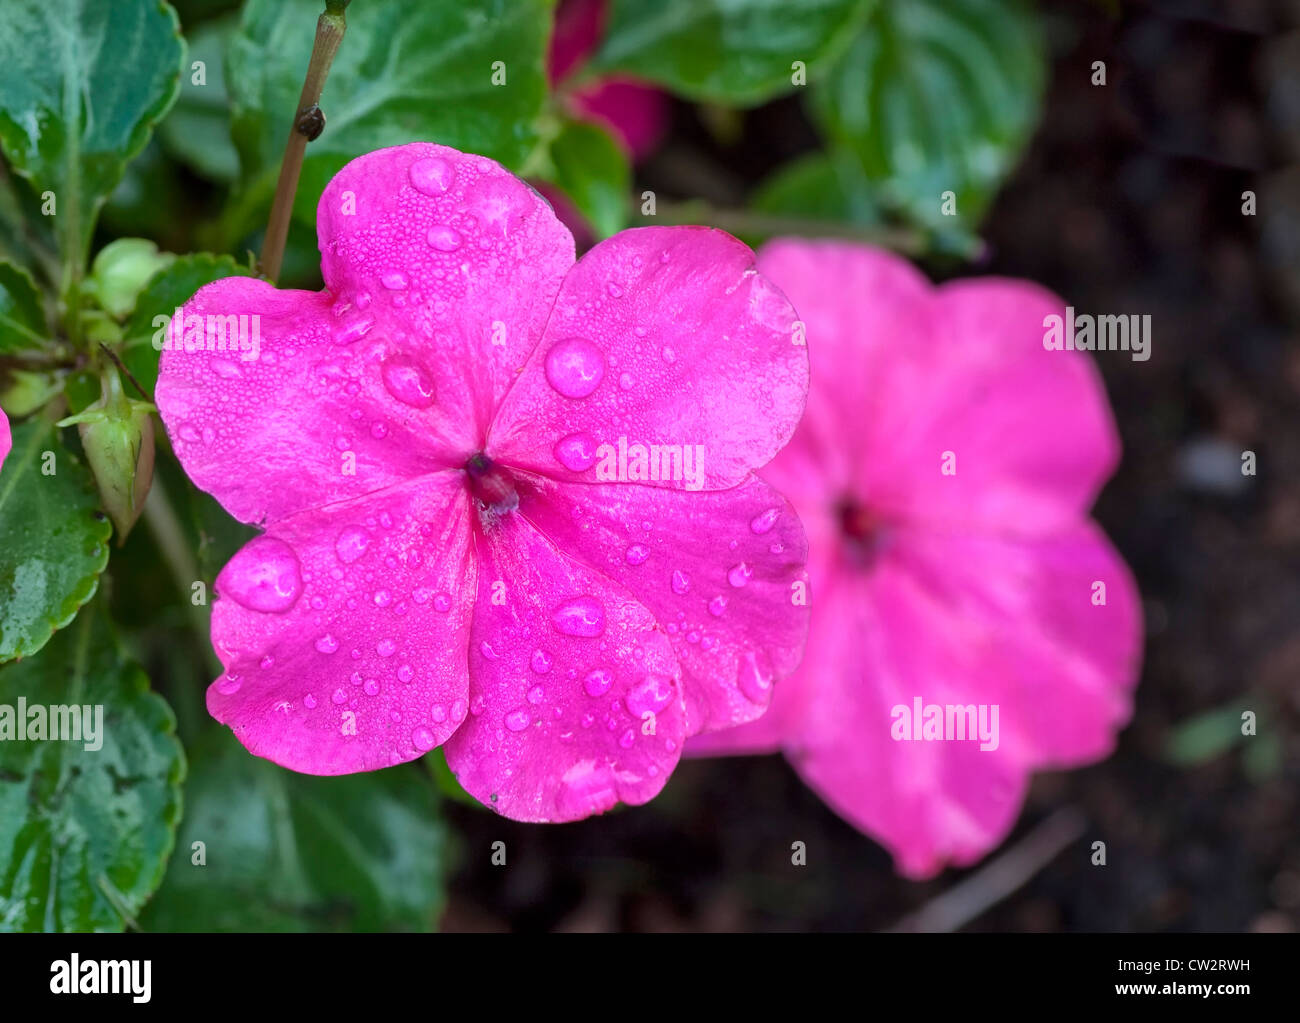 Bright pink flower of an impatiens plant with dew drops or rain drops, a popular flowering annual in the home garden. Stock Photo